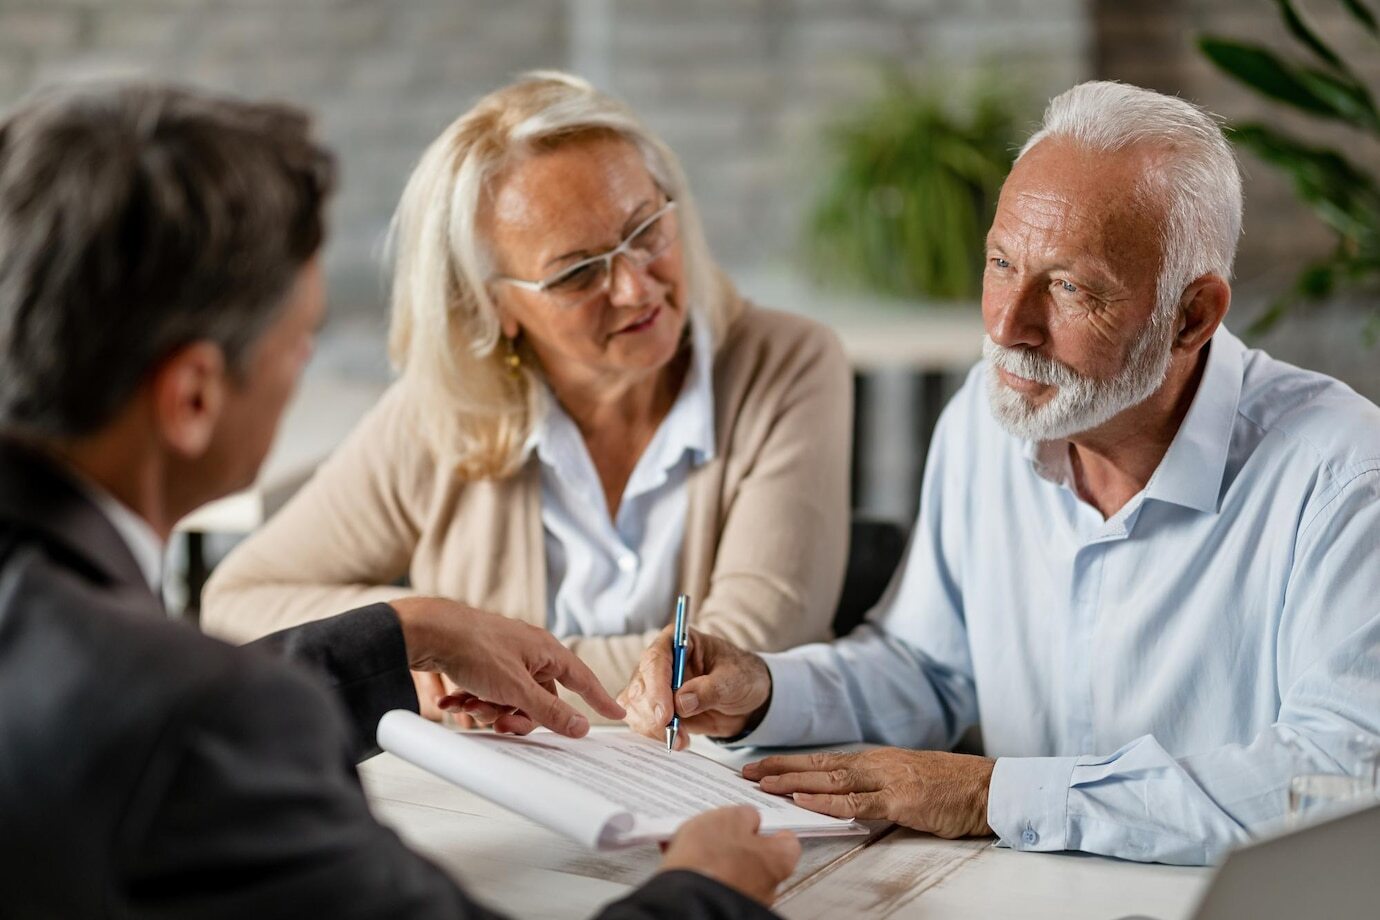 Staffords Wealth Management photo explaining to a couple about Estate Planning Strategies and how it helps you to provide for the future of your loved ones and ensures your assets are preserved for future generations, according to your wishes.